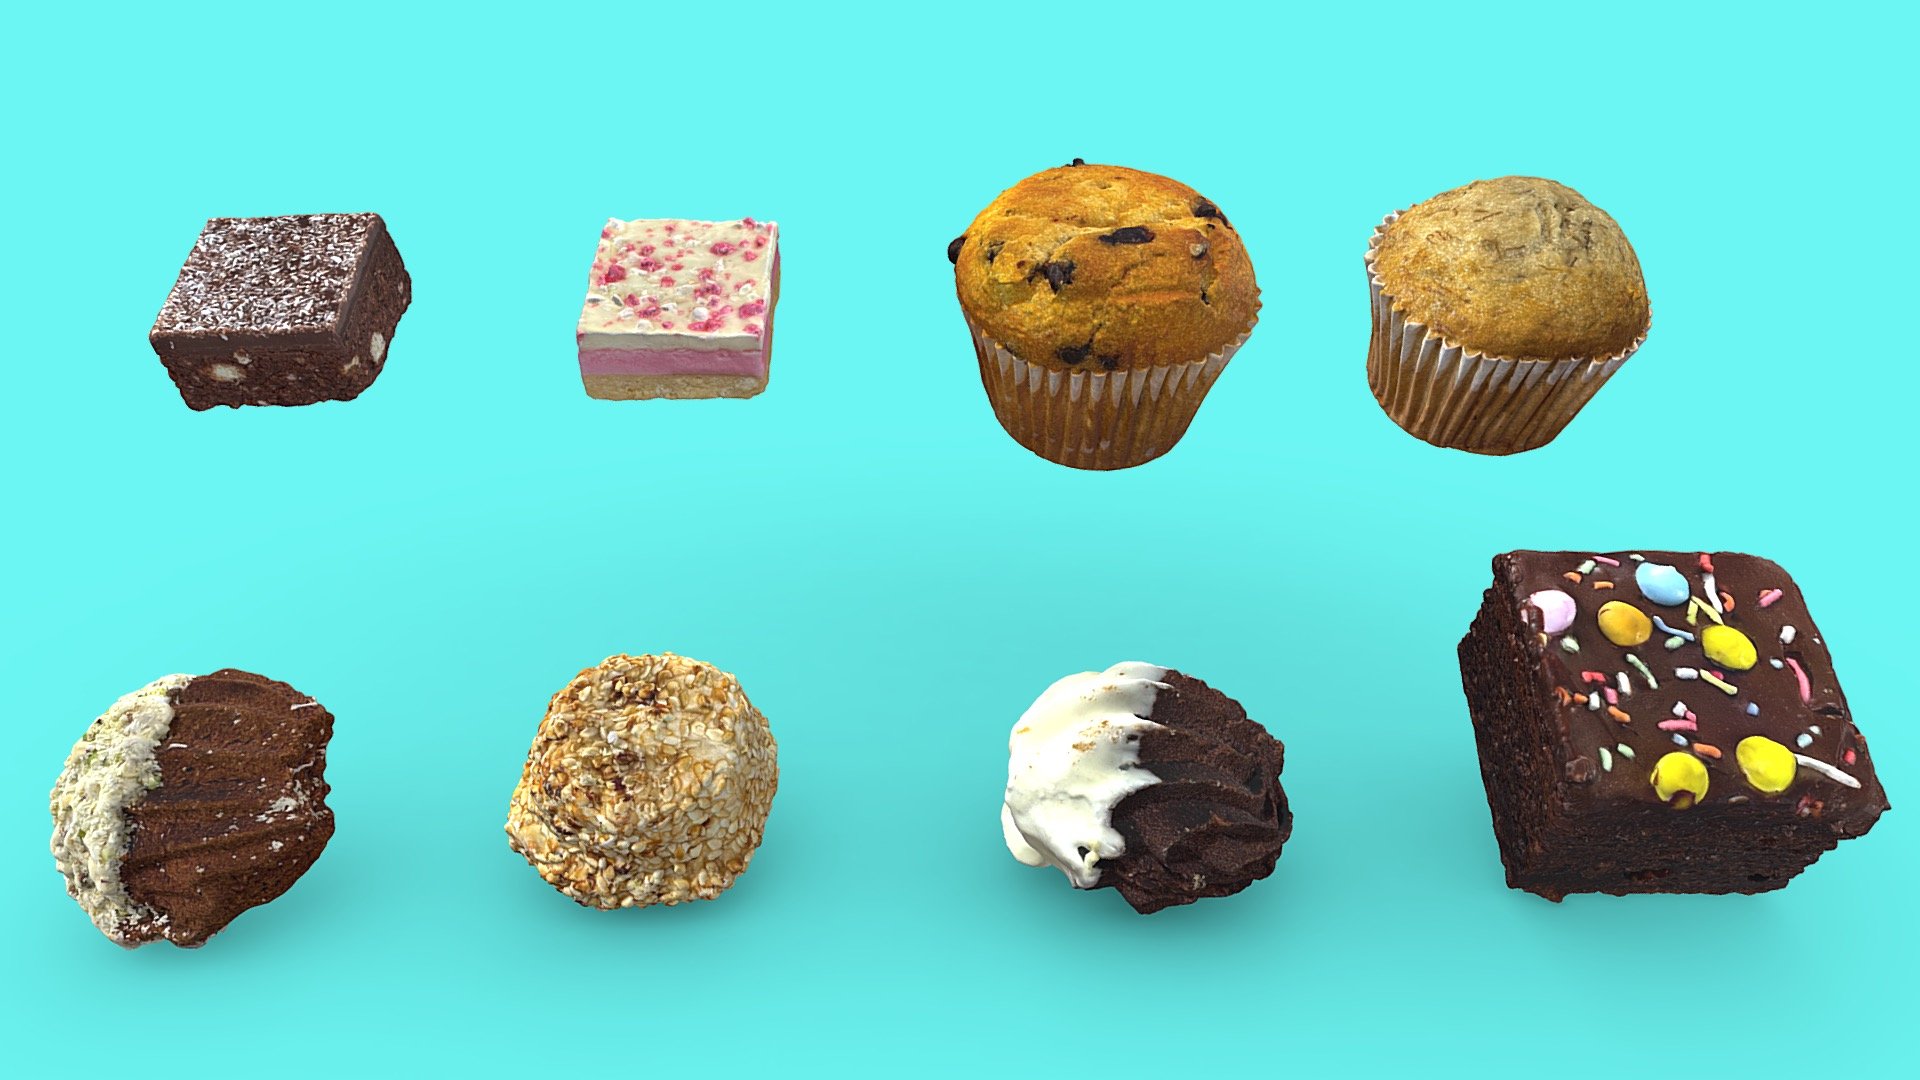 A collection of 8 photogrammetry scanned desserts.
- Bana cake cupcake
- Chocolate biscuit
- Hedgehog slice
- Mini chocolate chip cupcake
- Party slice with sprinkles
- Sesame seed biscuit
- Lemon slice
- White chocolate dipped biscuit - Desserts Collection - Buy Royalty Free 3D model by Andrei Alexandrescu (@Andrei_Alexandrescu) 3d model